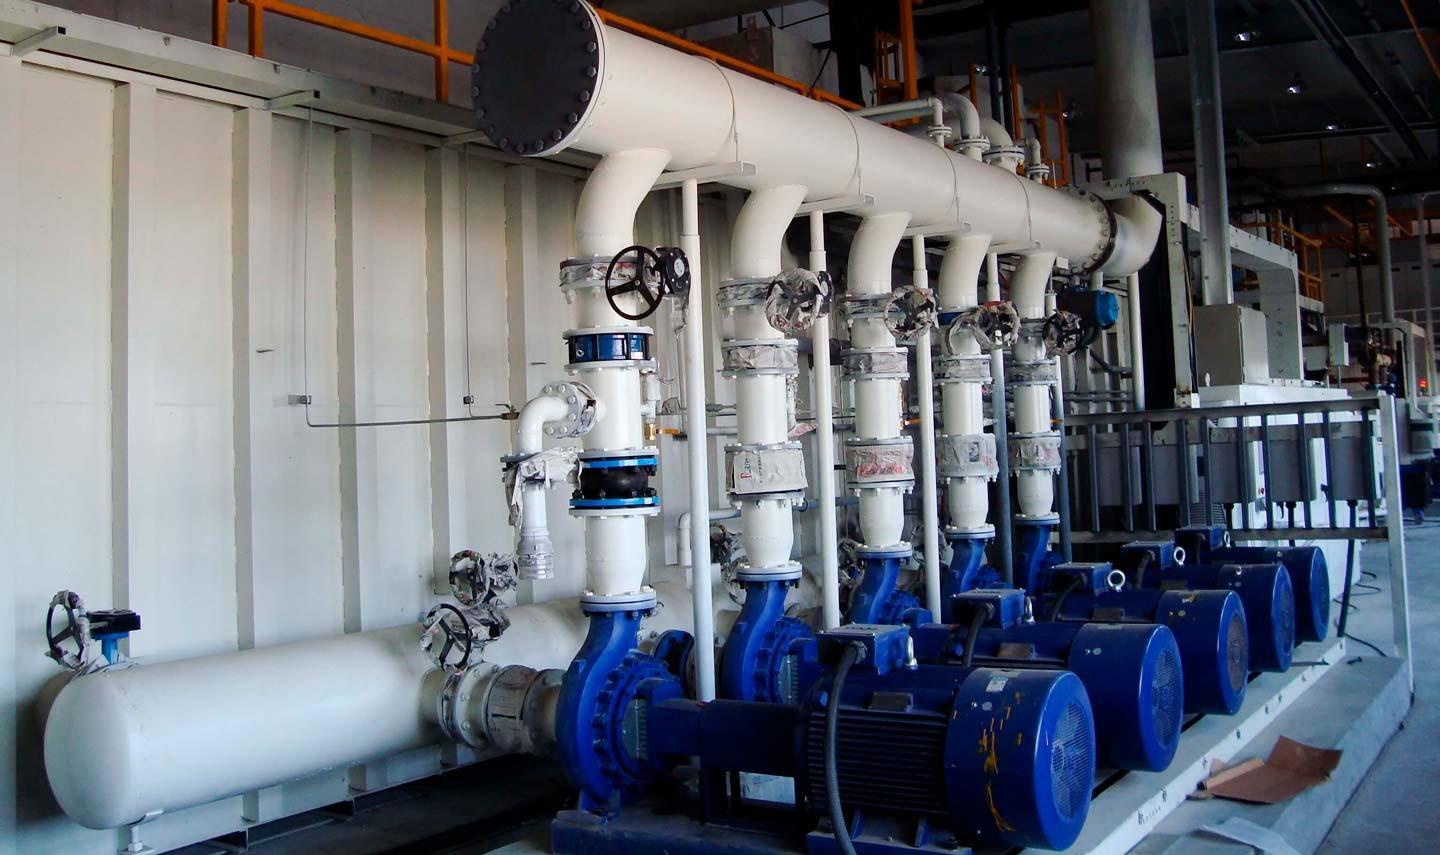 Types Of Industrial Filtration: Most Common Filtration Systems And Where They Are Applicable To Use